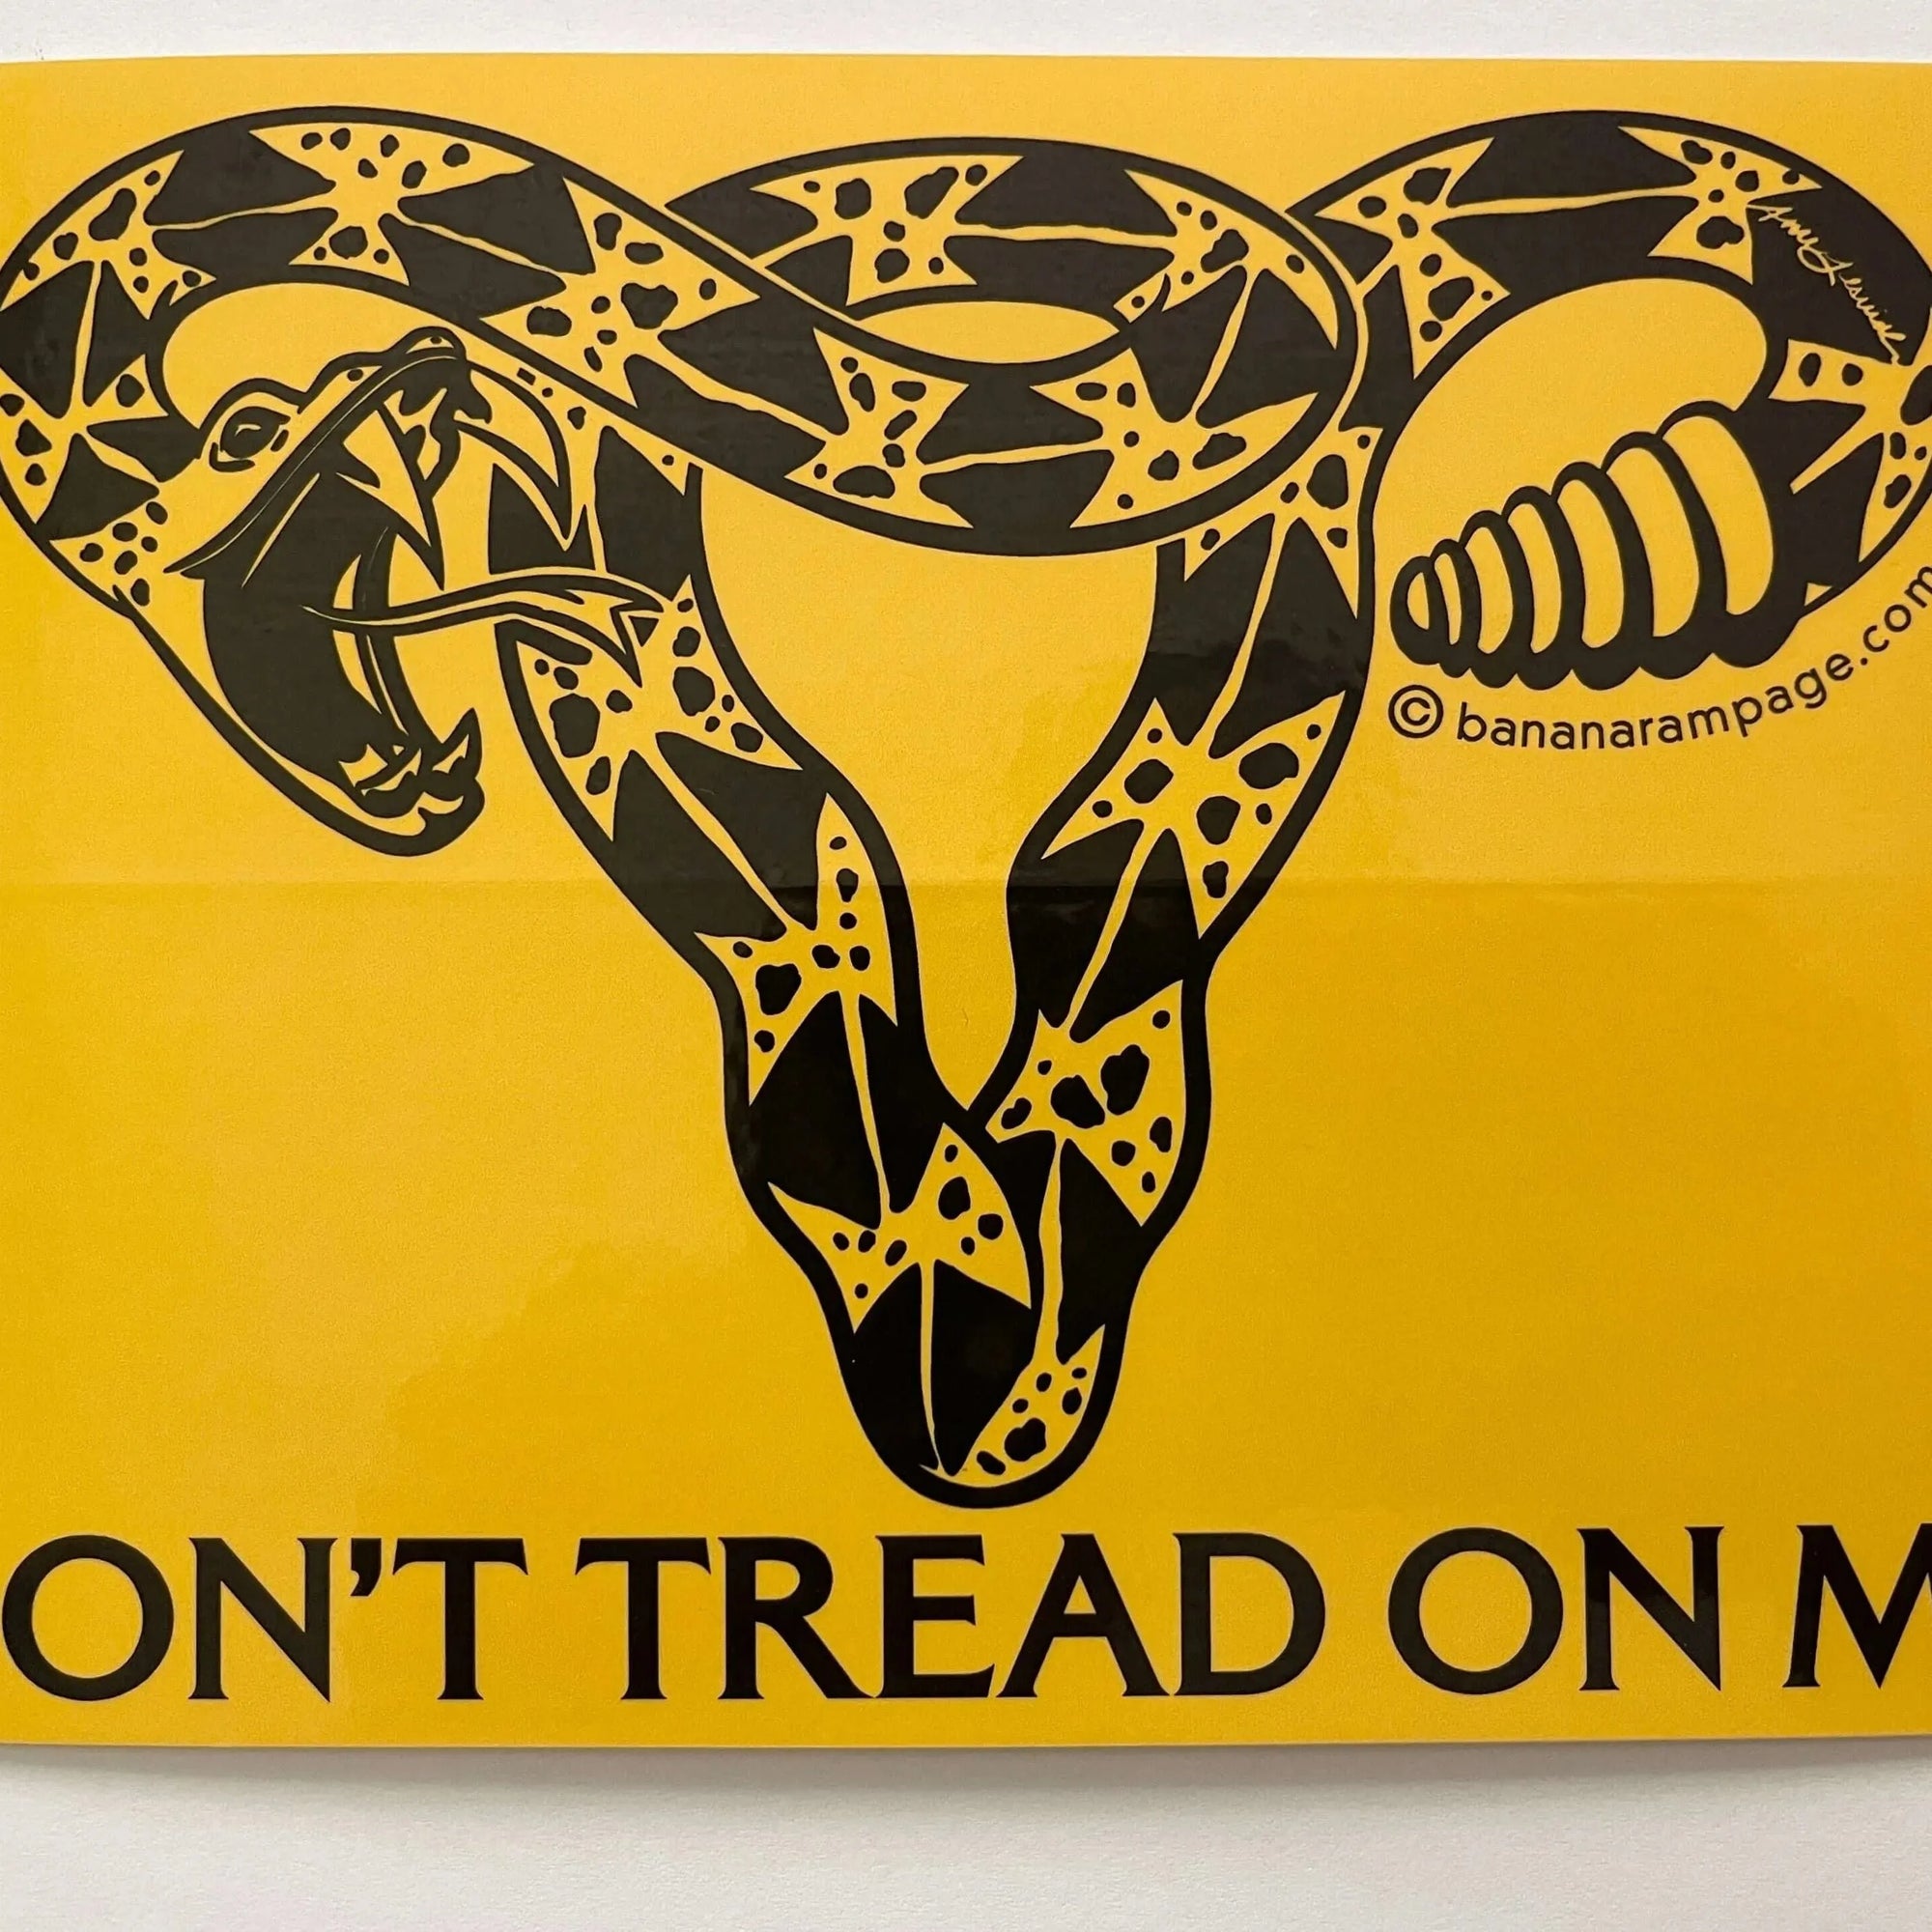 Don’t tread on me snake uterus pro choice bumpersticker for bodily autonomy shop for a cause Planned Parenthood my body my choice